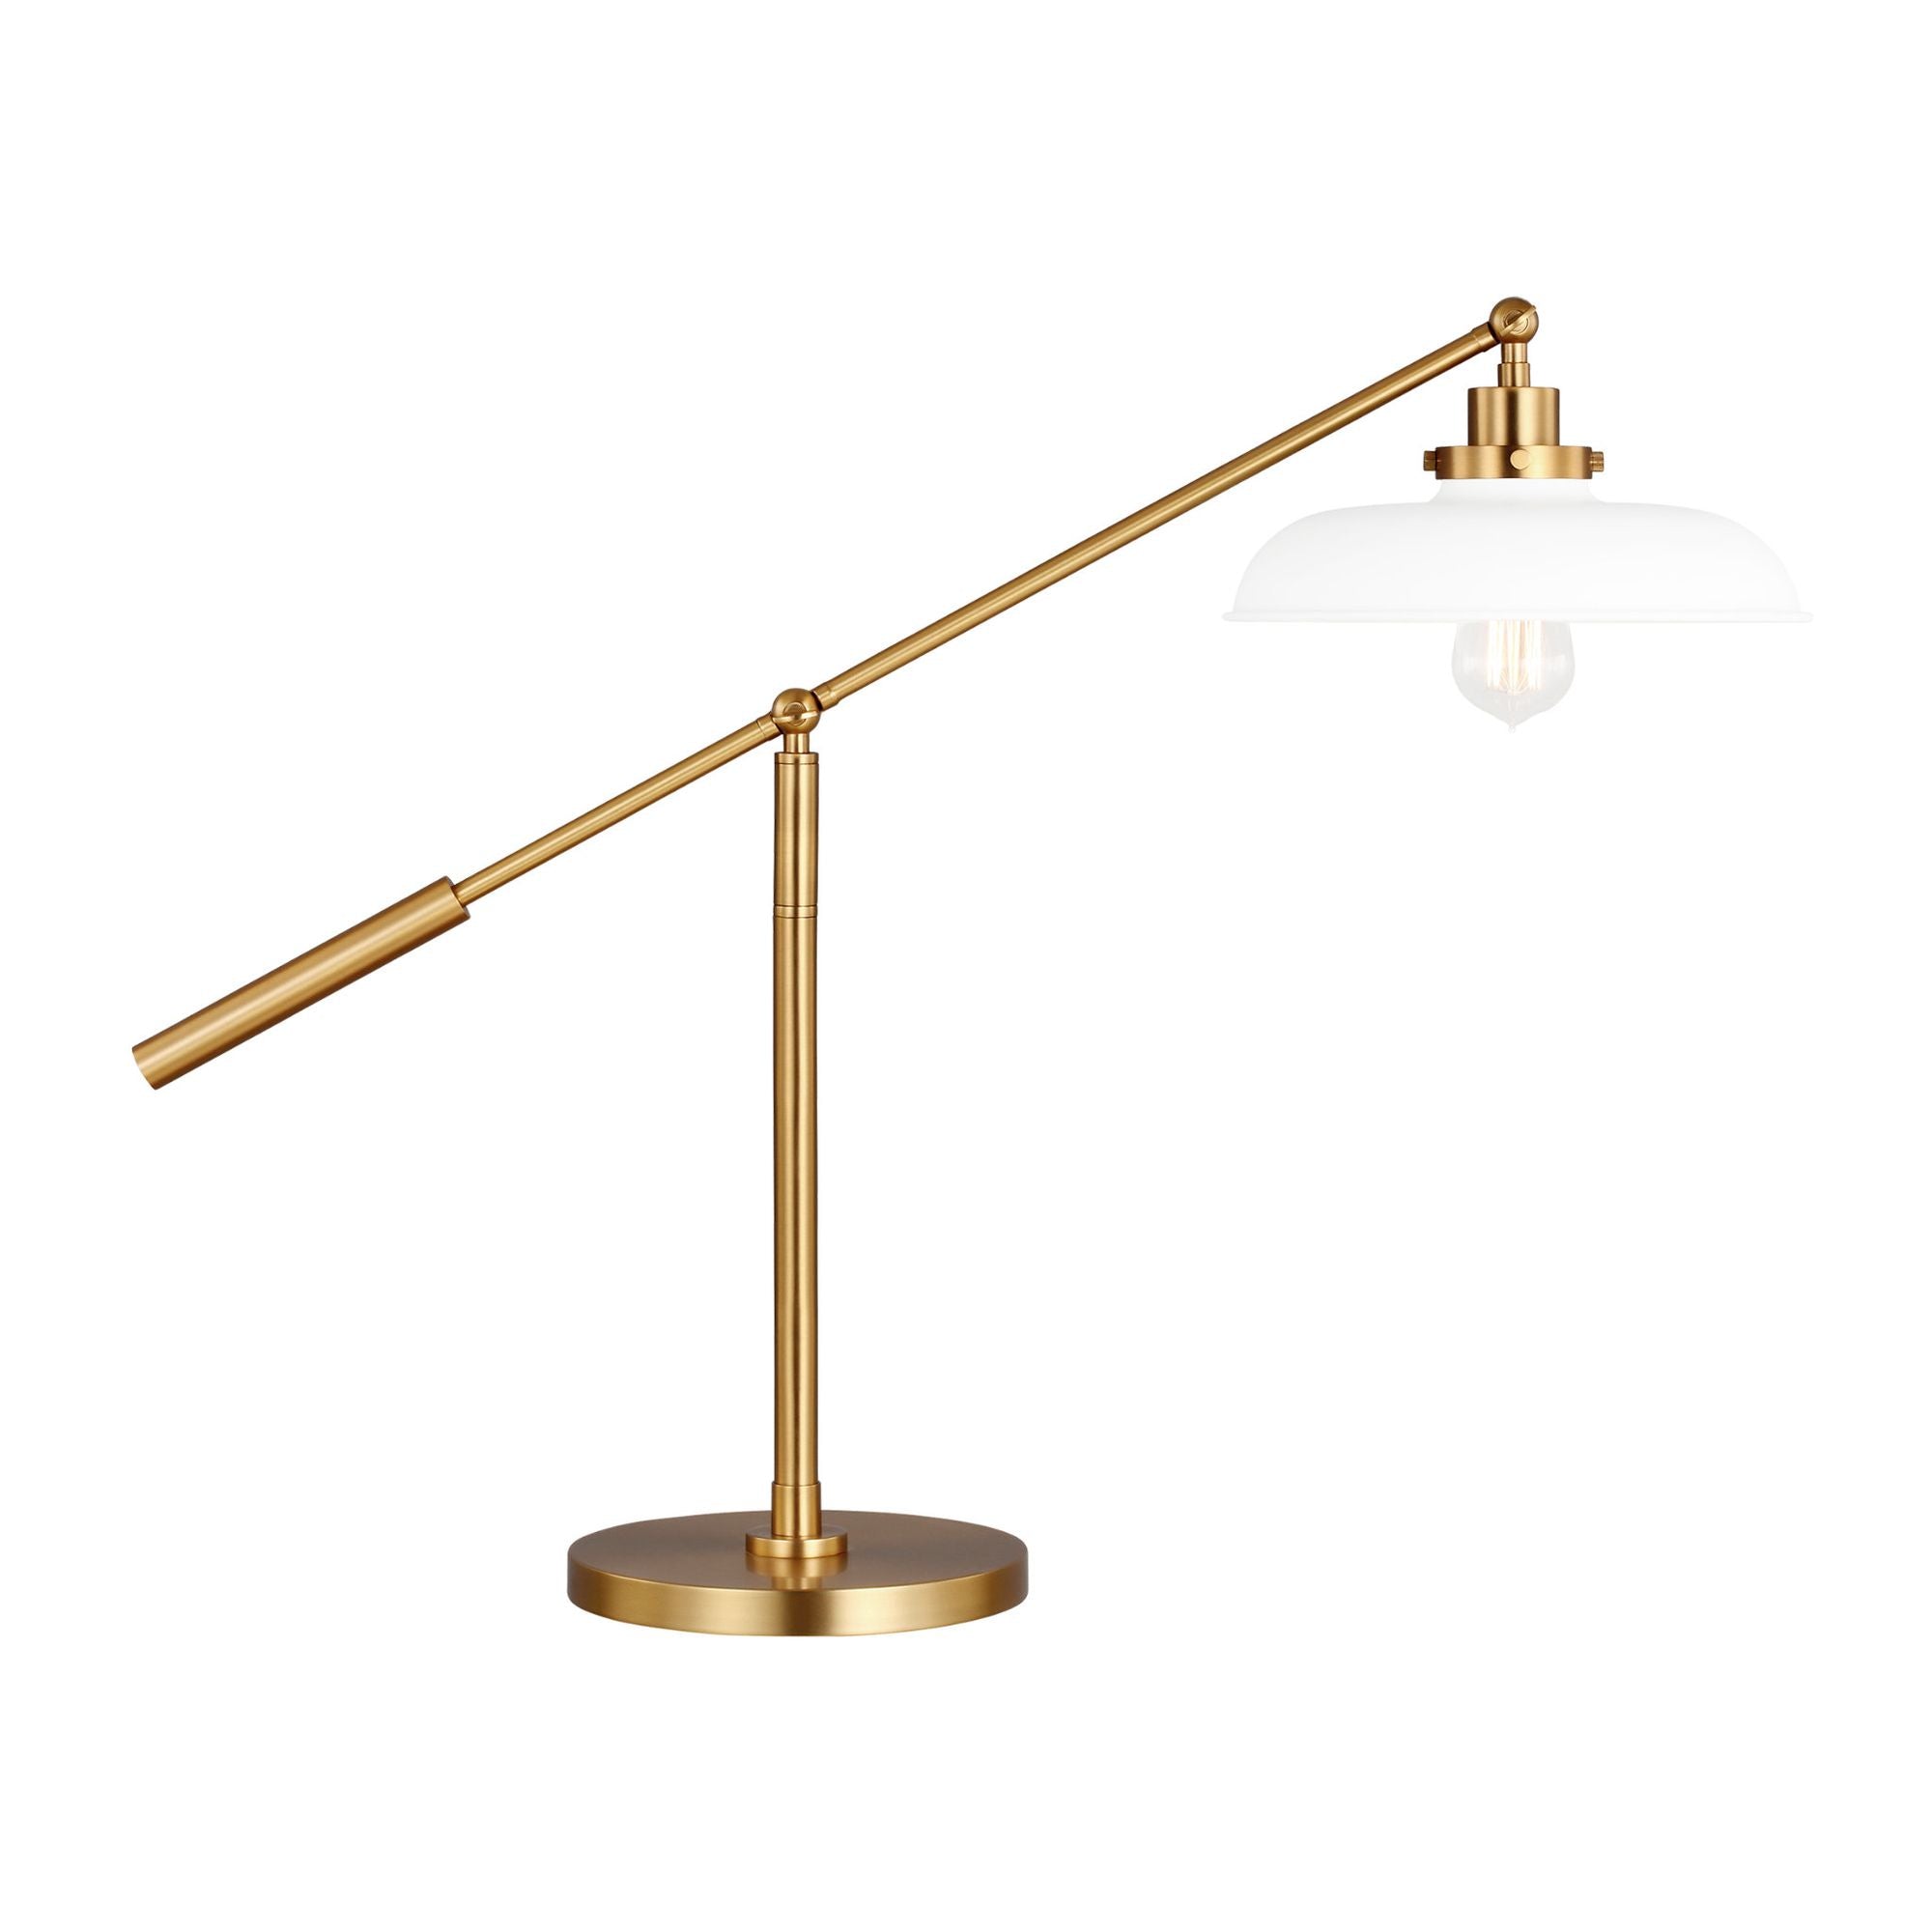 Chapman & Myers Wellfleet Wide Desk Lamp in Matte White and Burnished Brass